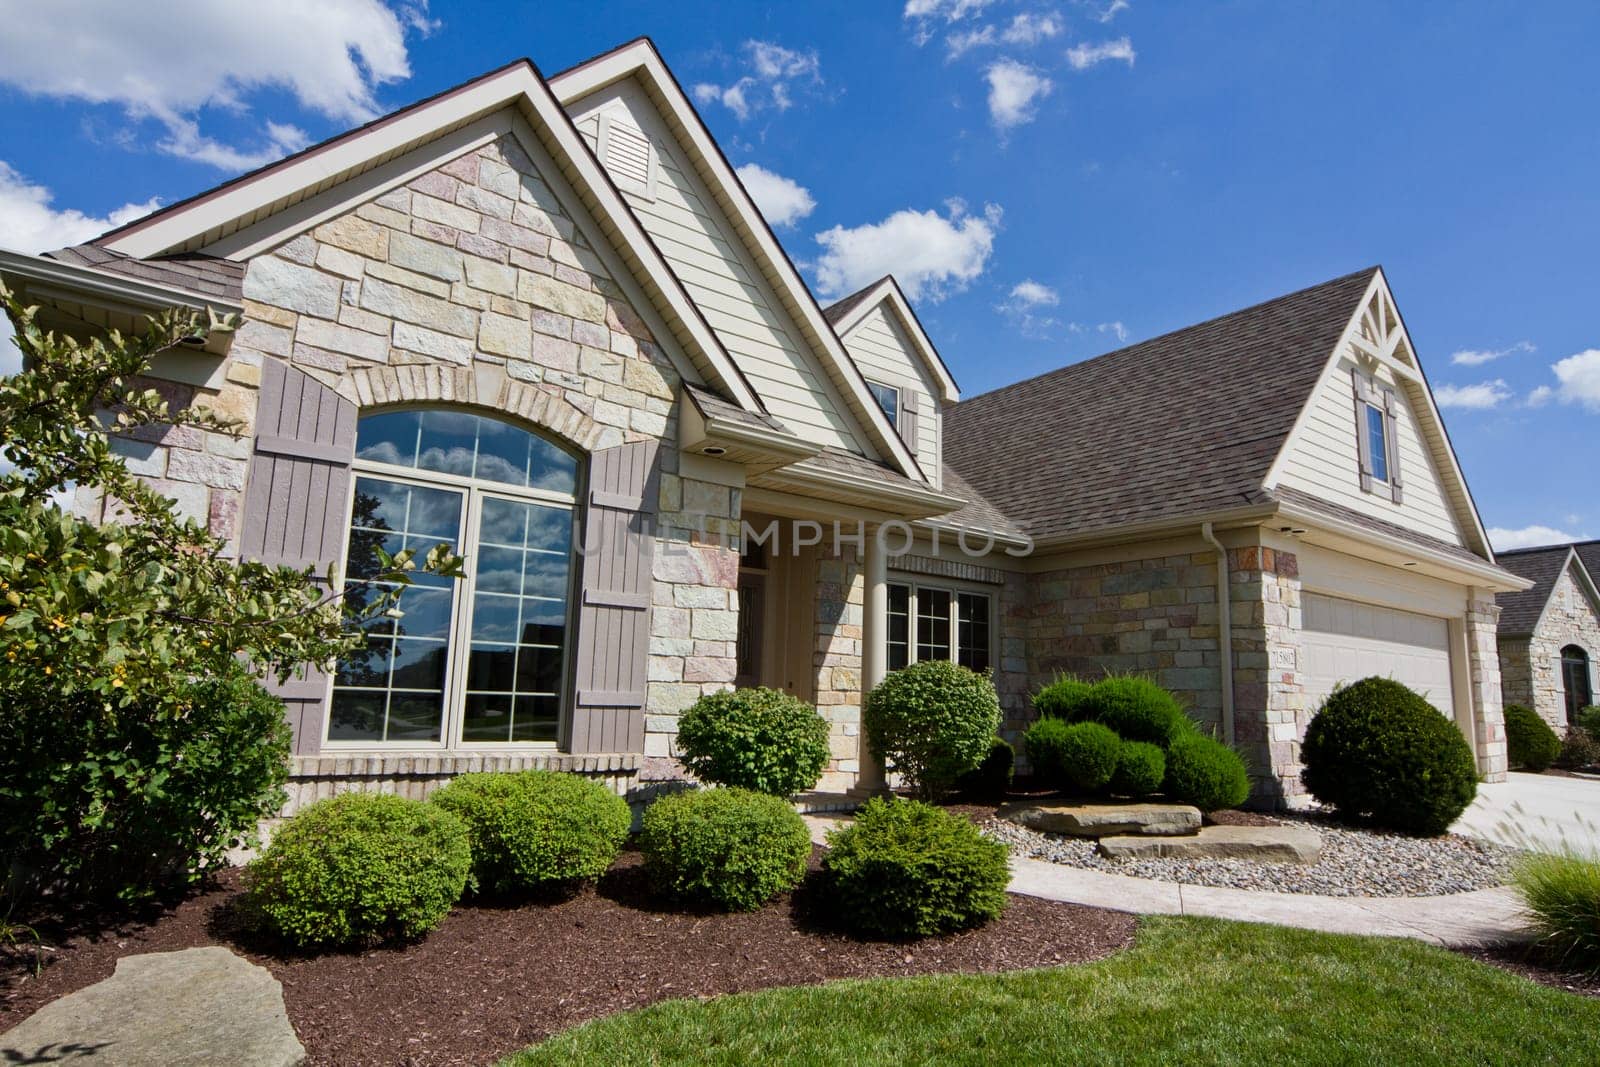 Modern suburban dream home in Fort Wayne, Indiana. This spacious single-family residence features a stunning combination of stone and siding, with an arched window and a gable roof. A well-maintained front yard.